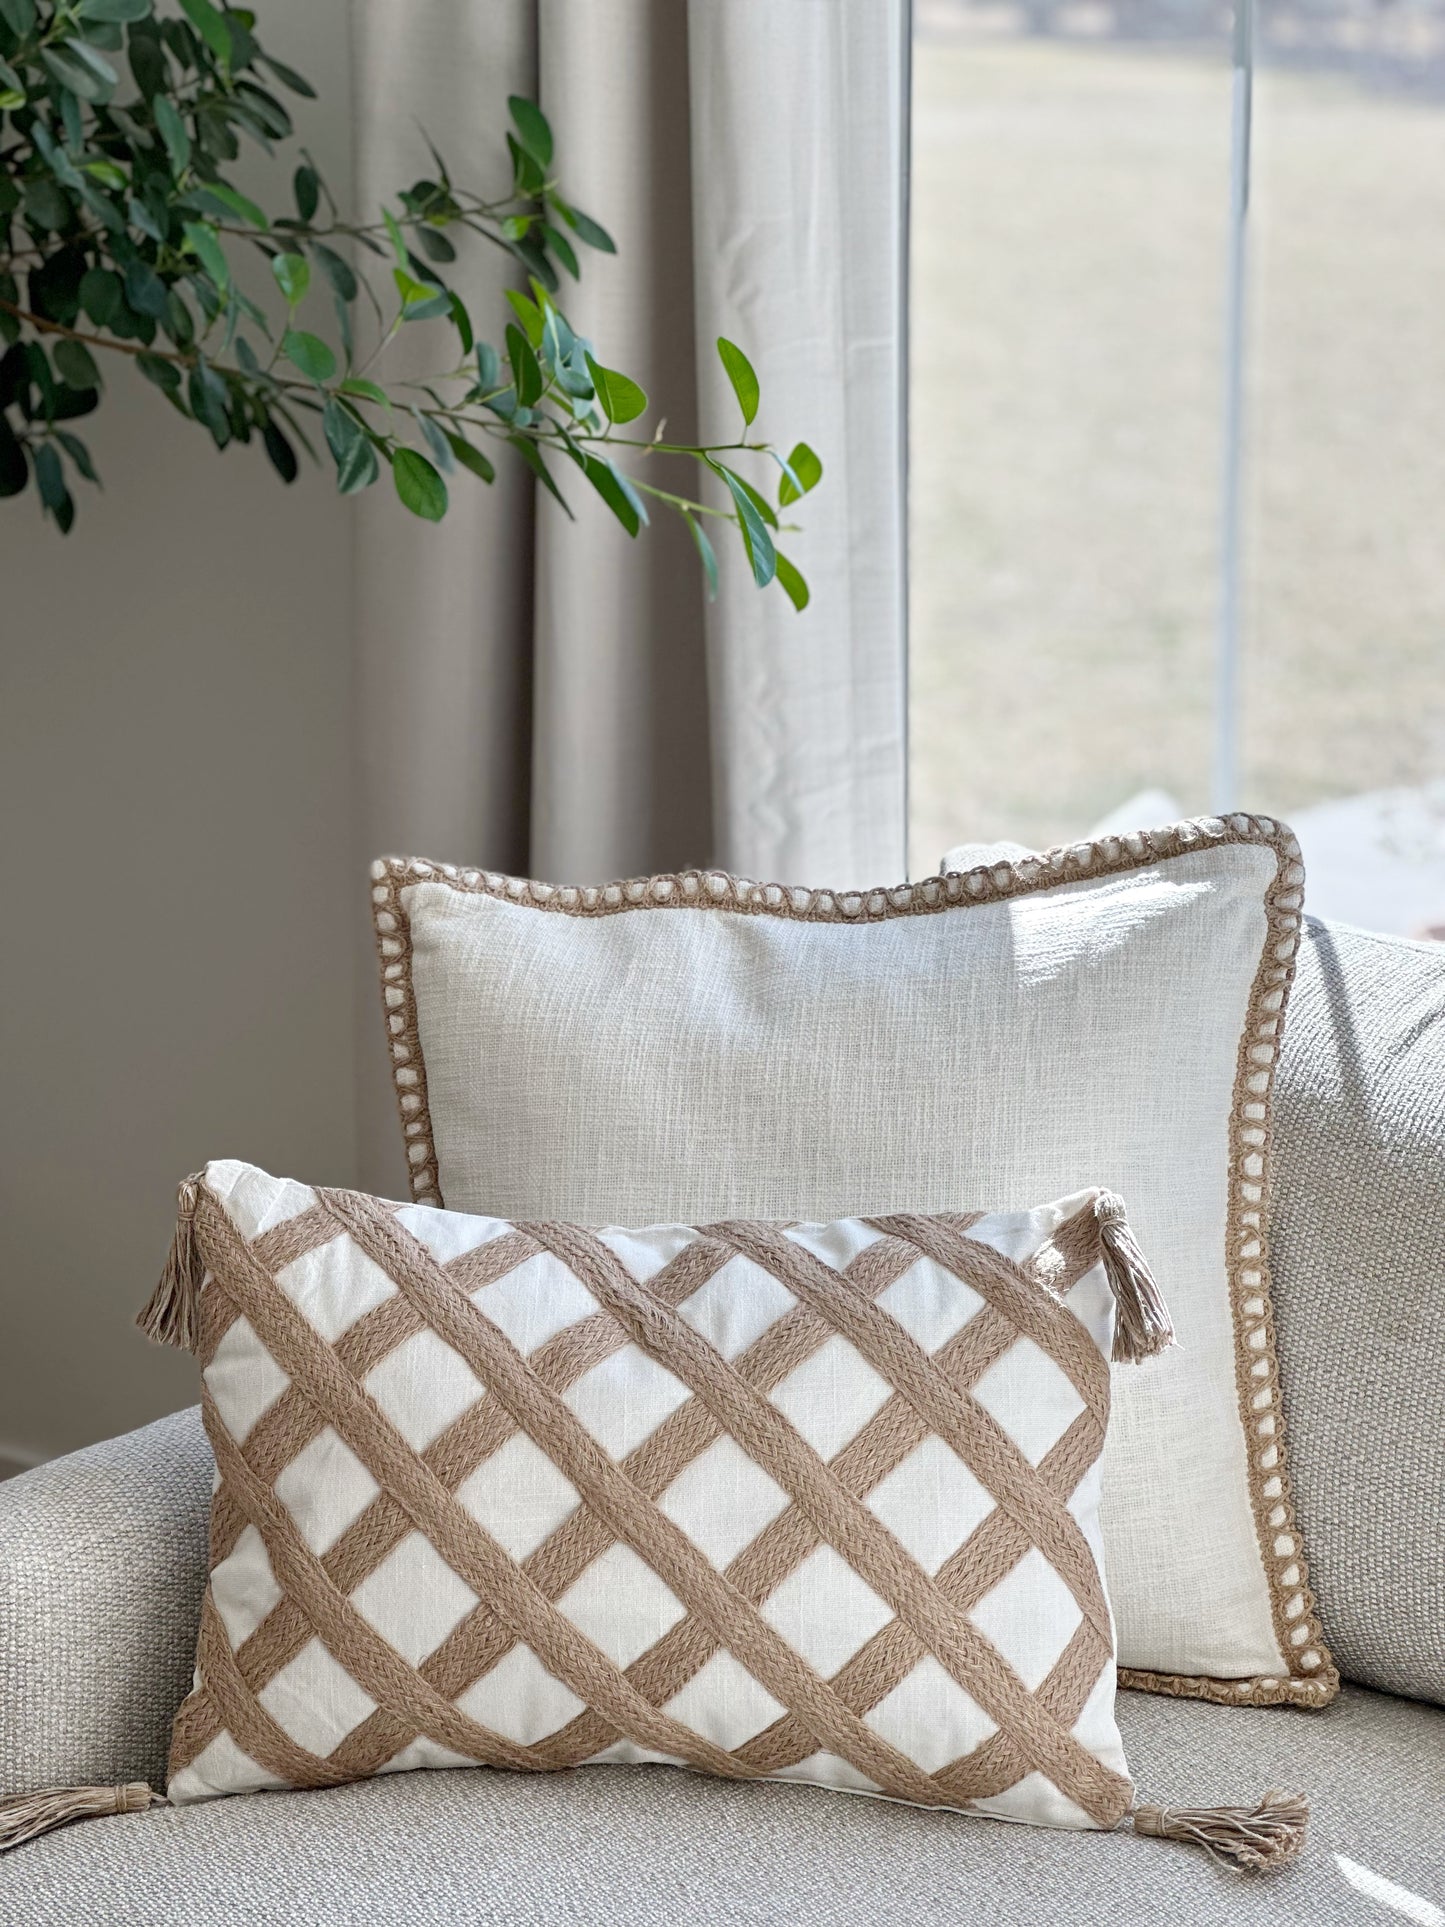 WOVEN CREAM COTTON PILLOW W/LOOP STITCHED FLANGE EDGE